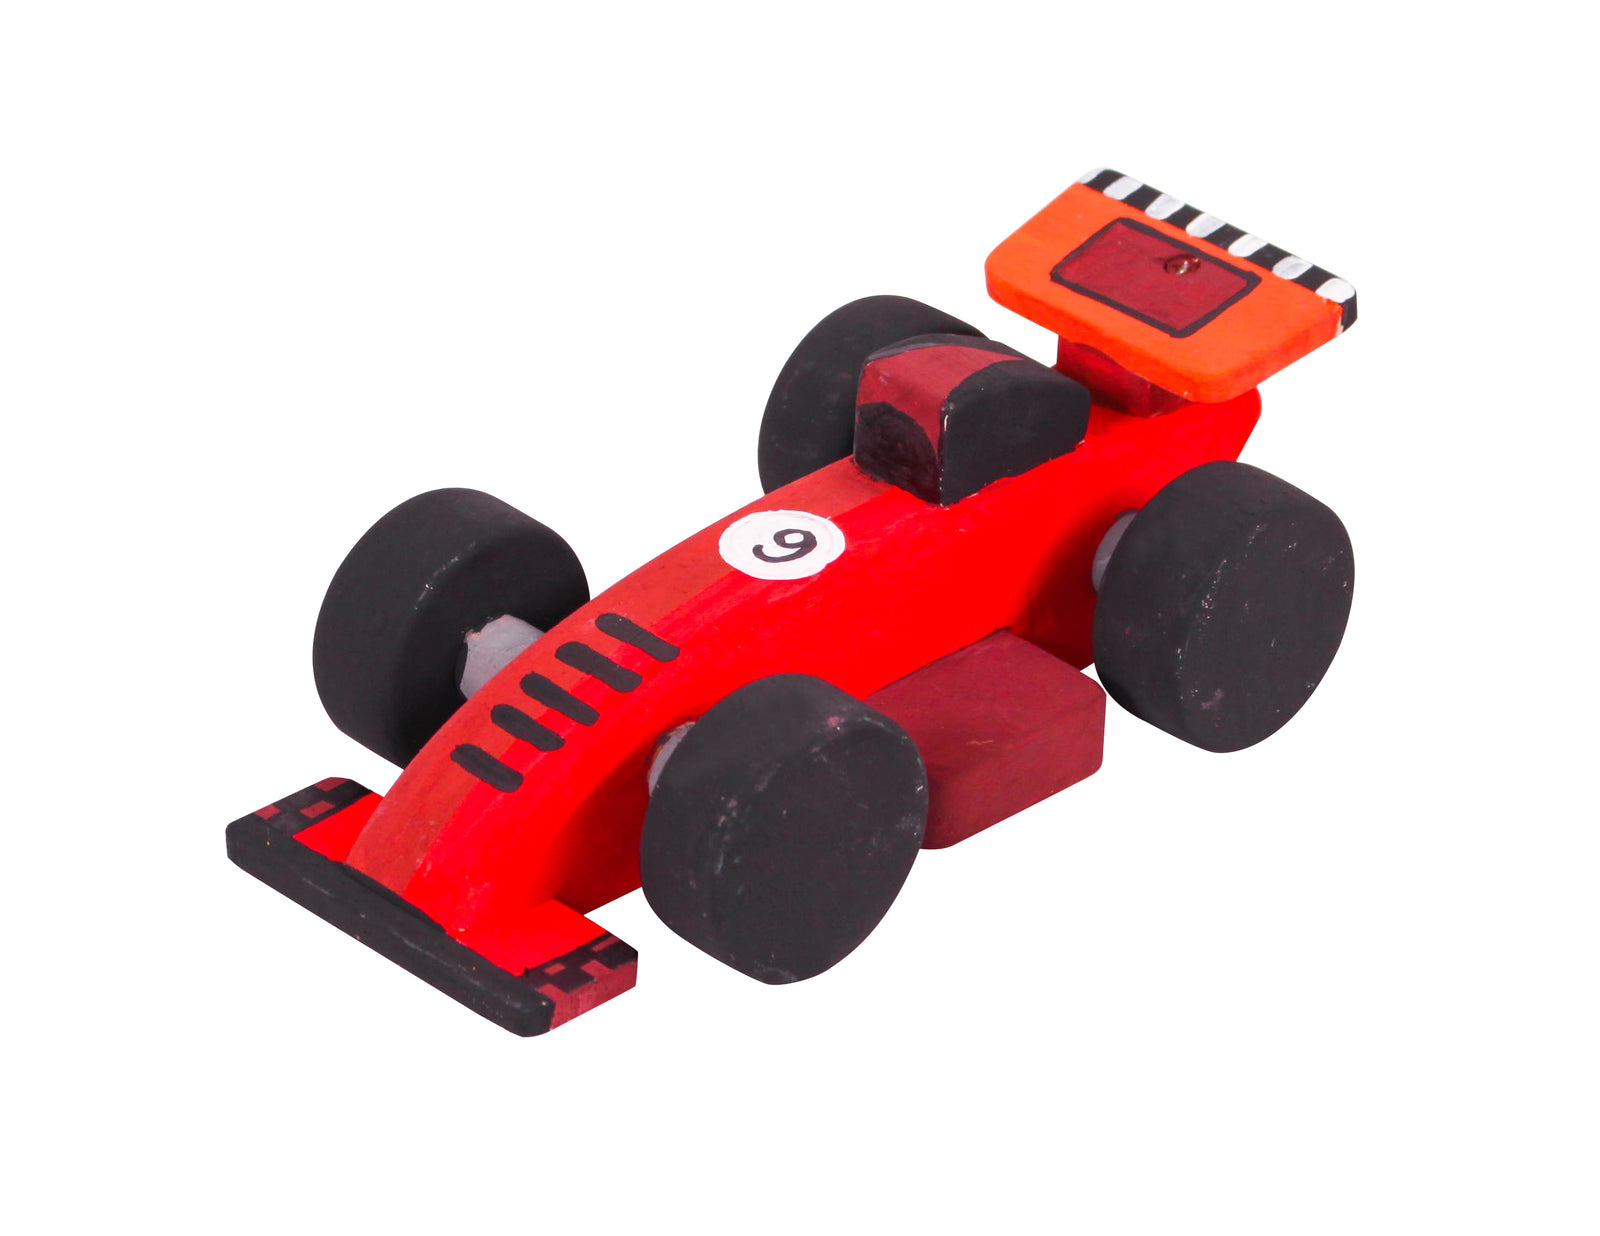 Paint and Play Racing Car